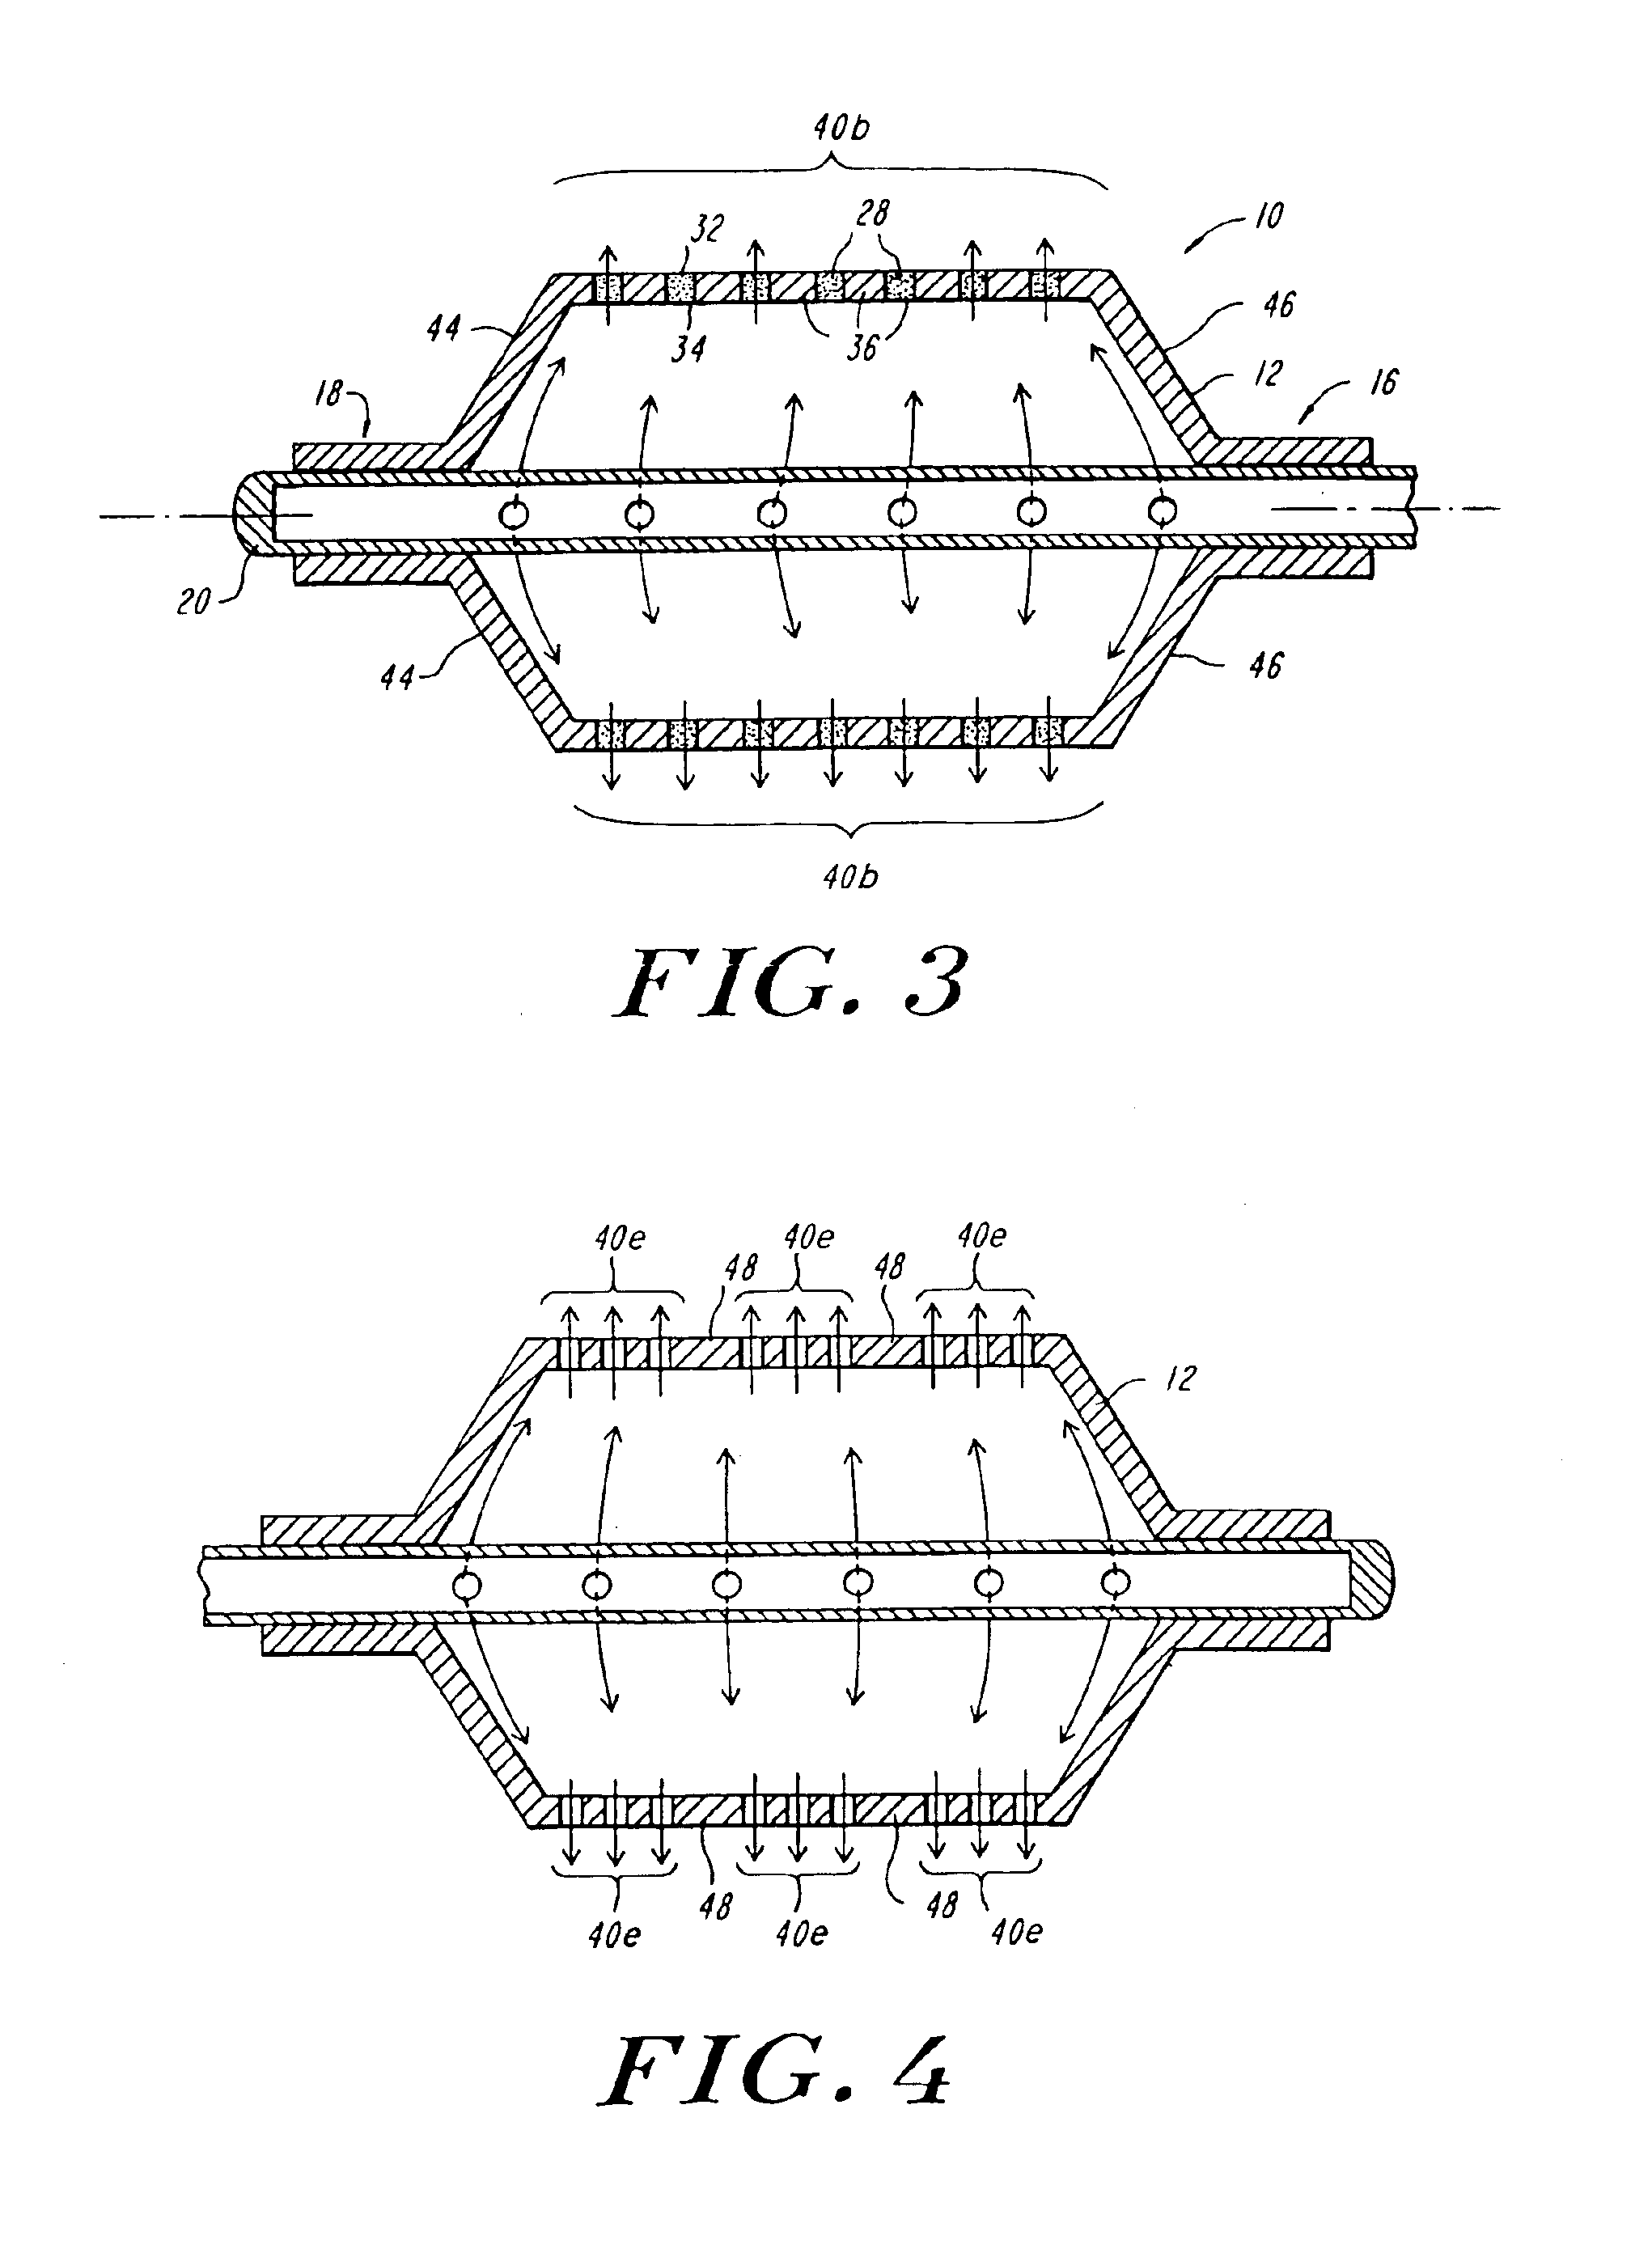 Expandable fluoropolymer device for delivery of therapeutic agents and method of making